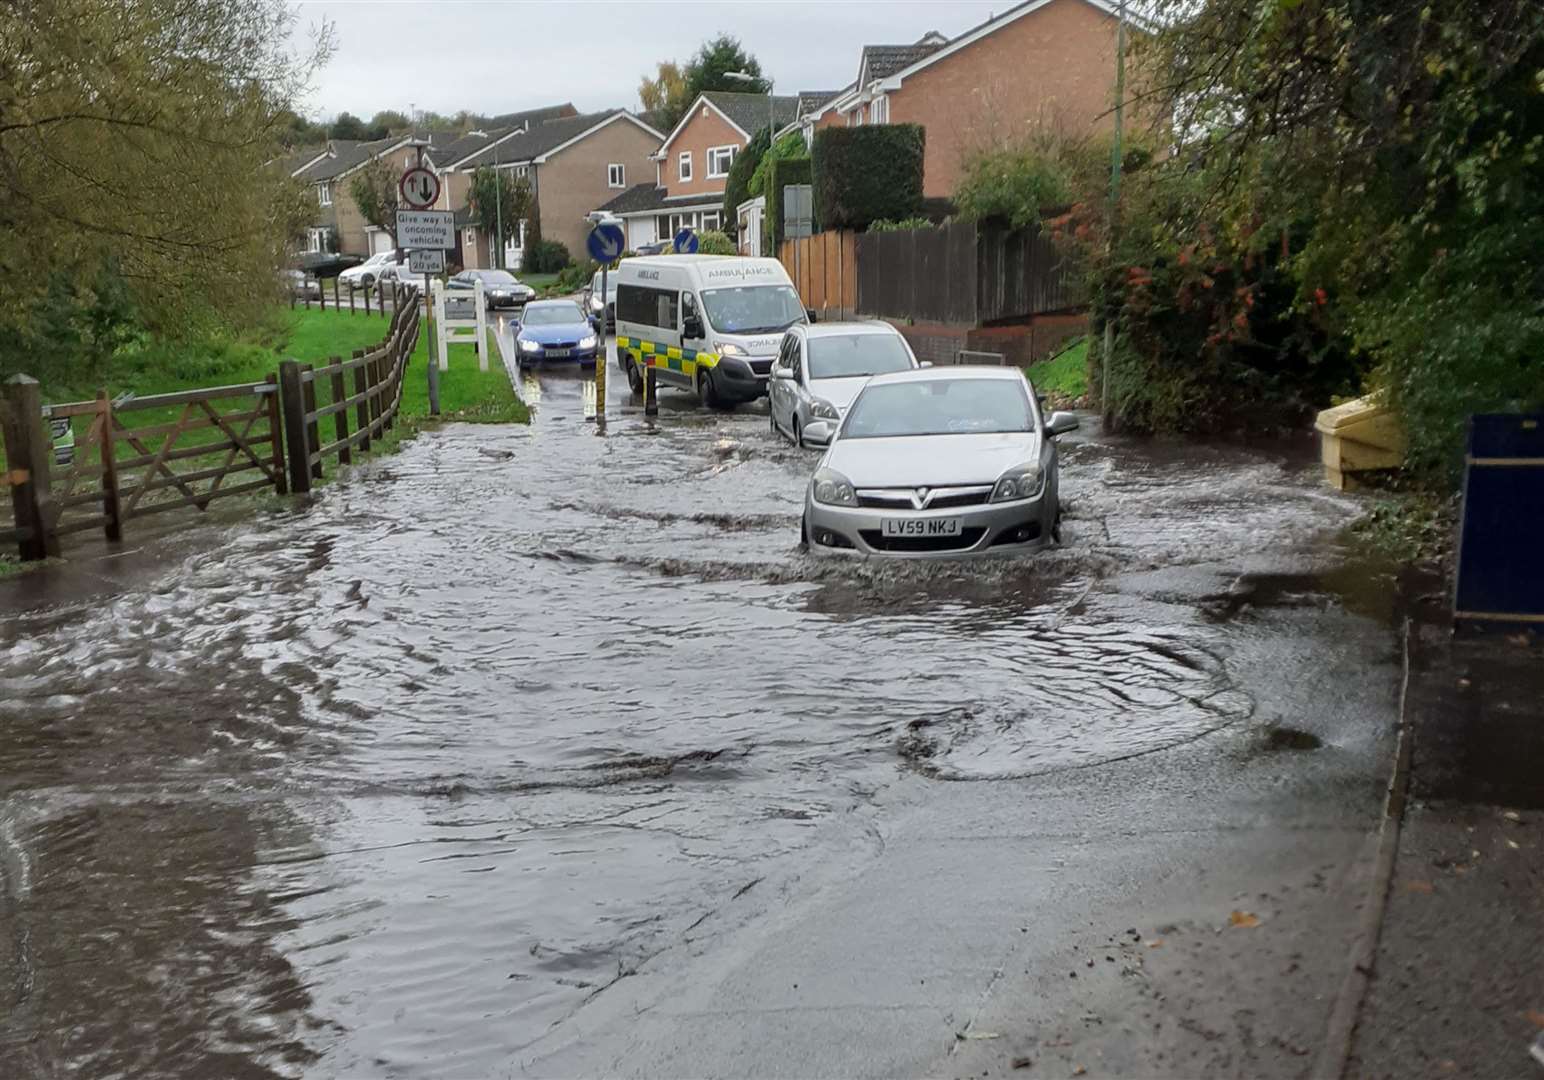 Cars are under water in Spot Lane, Maidstone